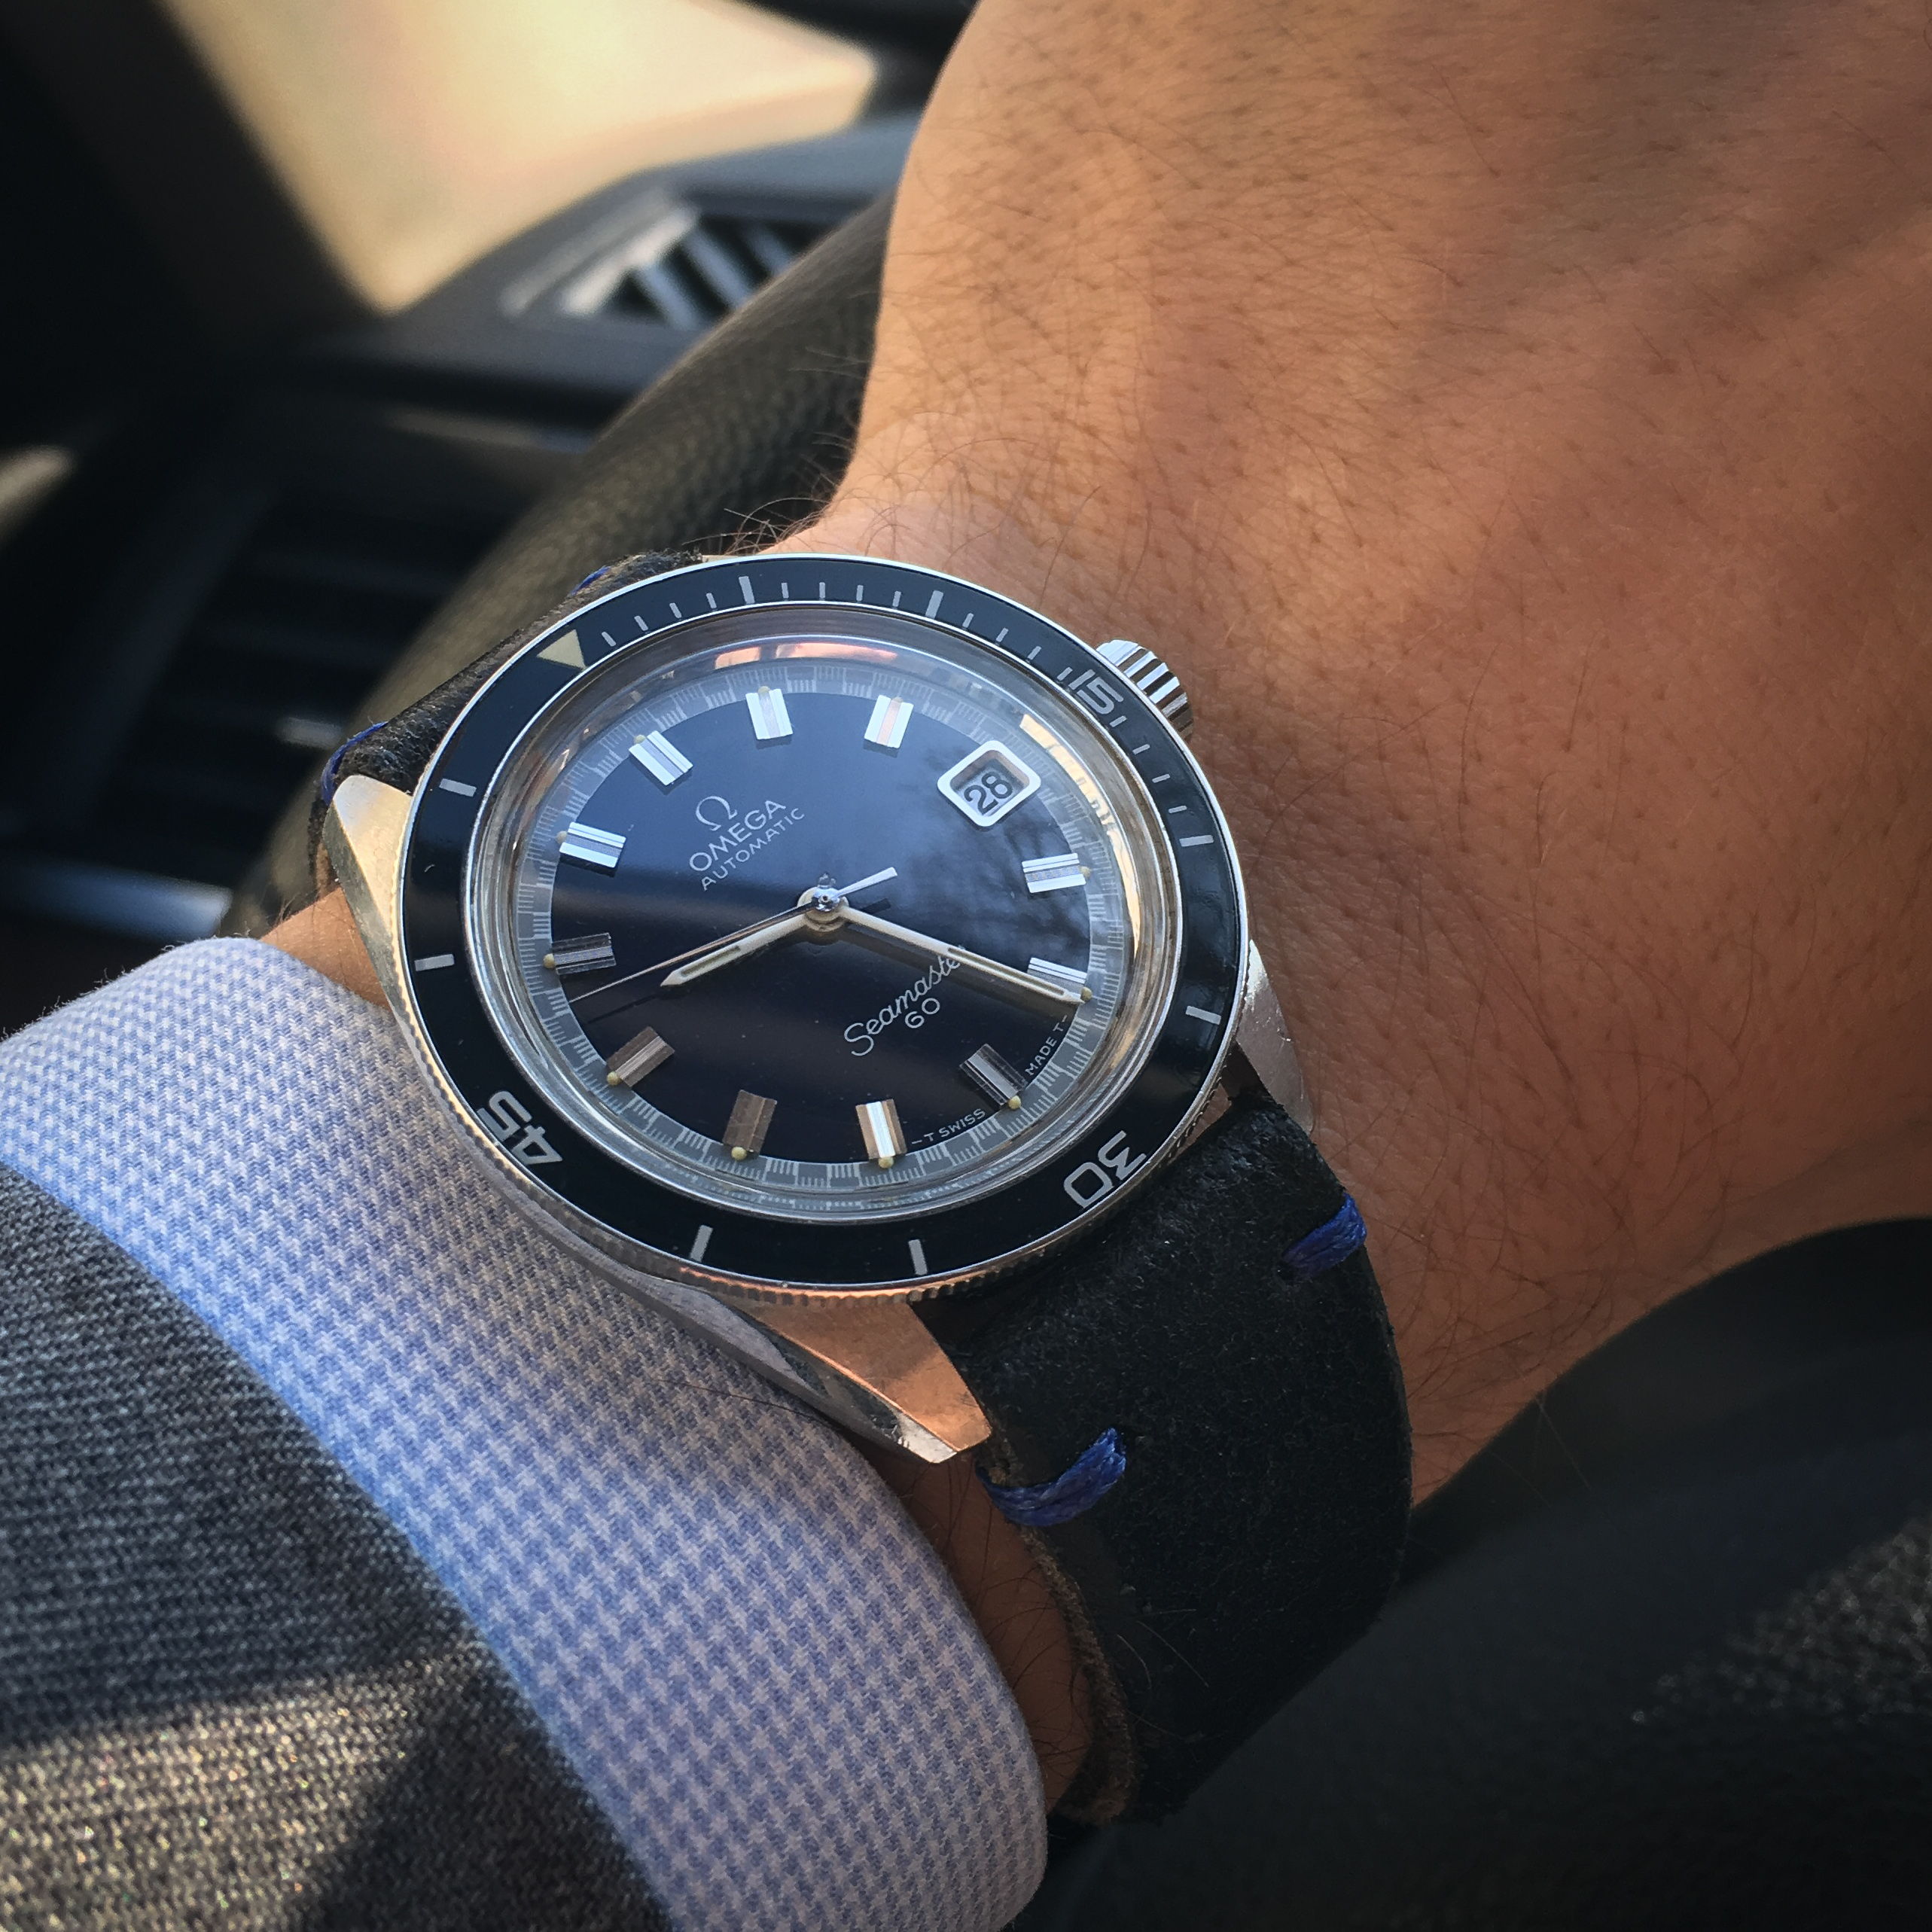 Questions regarding the Seamaster 60 